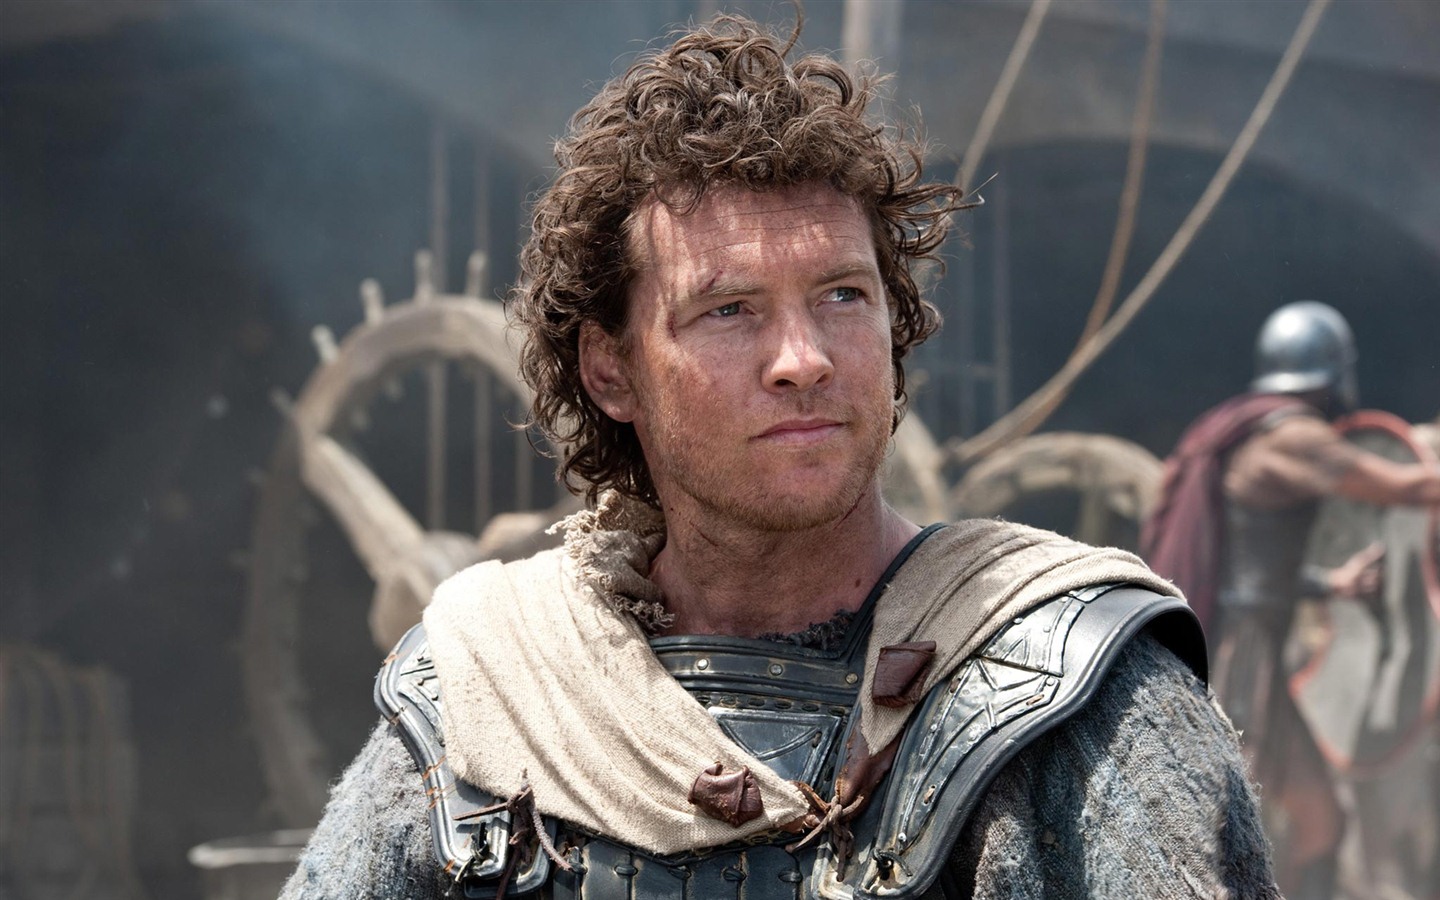 Wrath of the Titans HD Wallpapers #5 - 1440x900